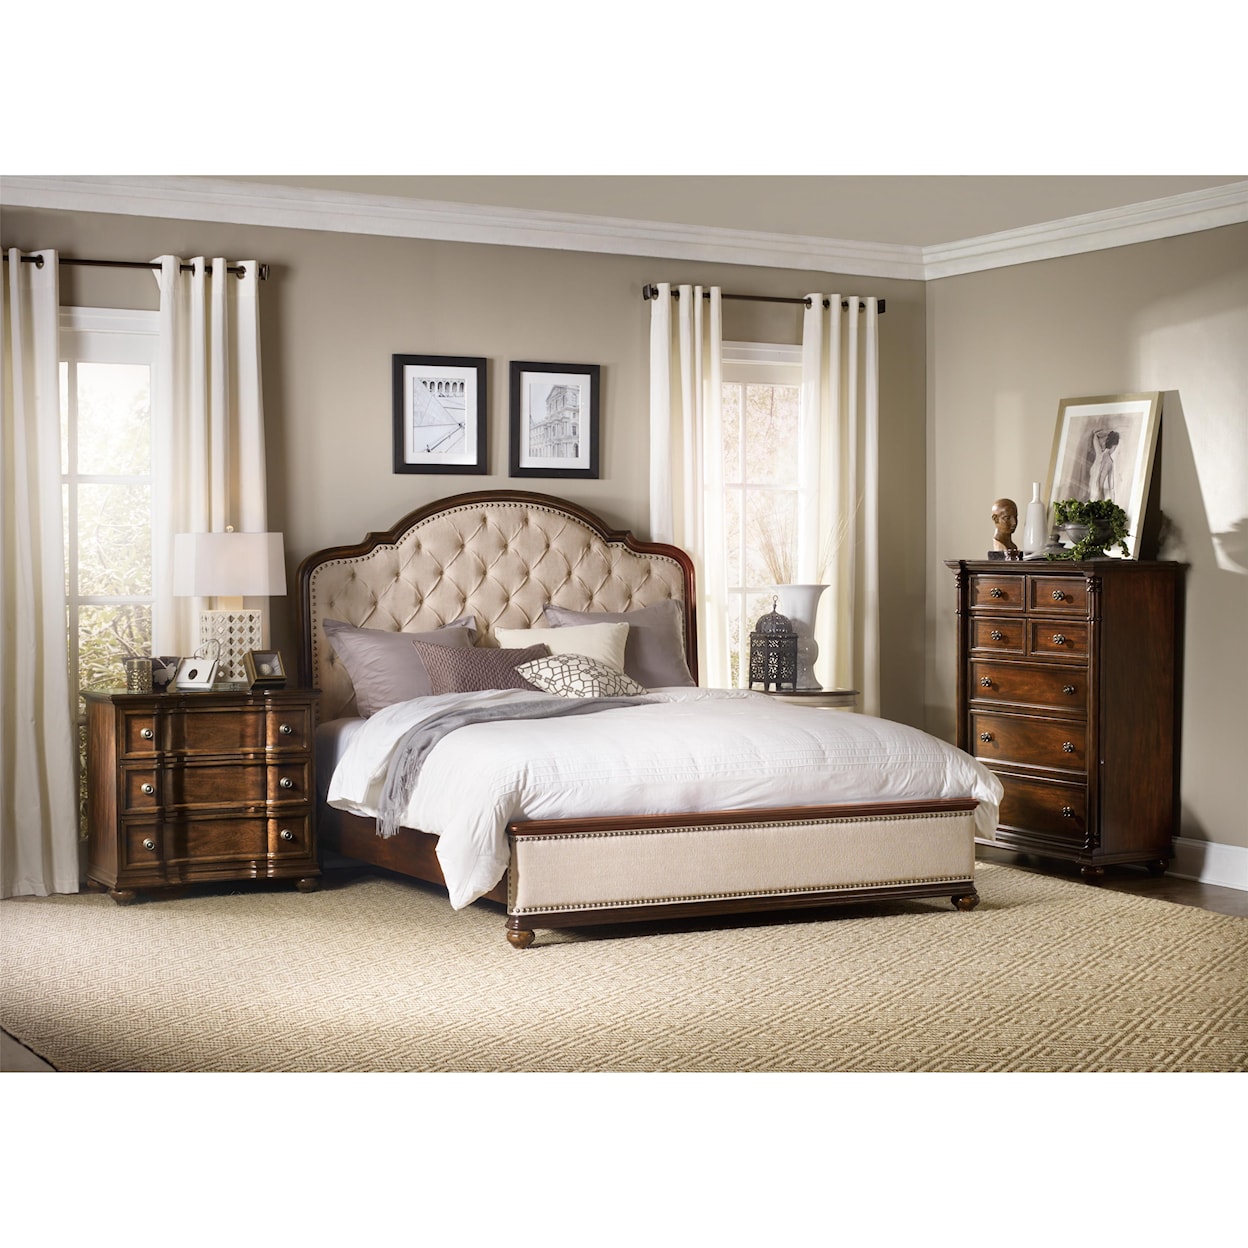 Hooker Furniture Leesburg Queen Size Upholstered Bed with Wood Rails